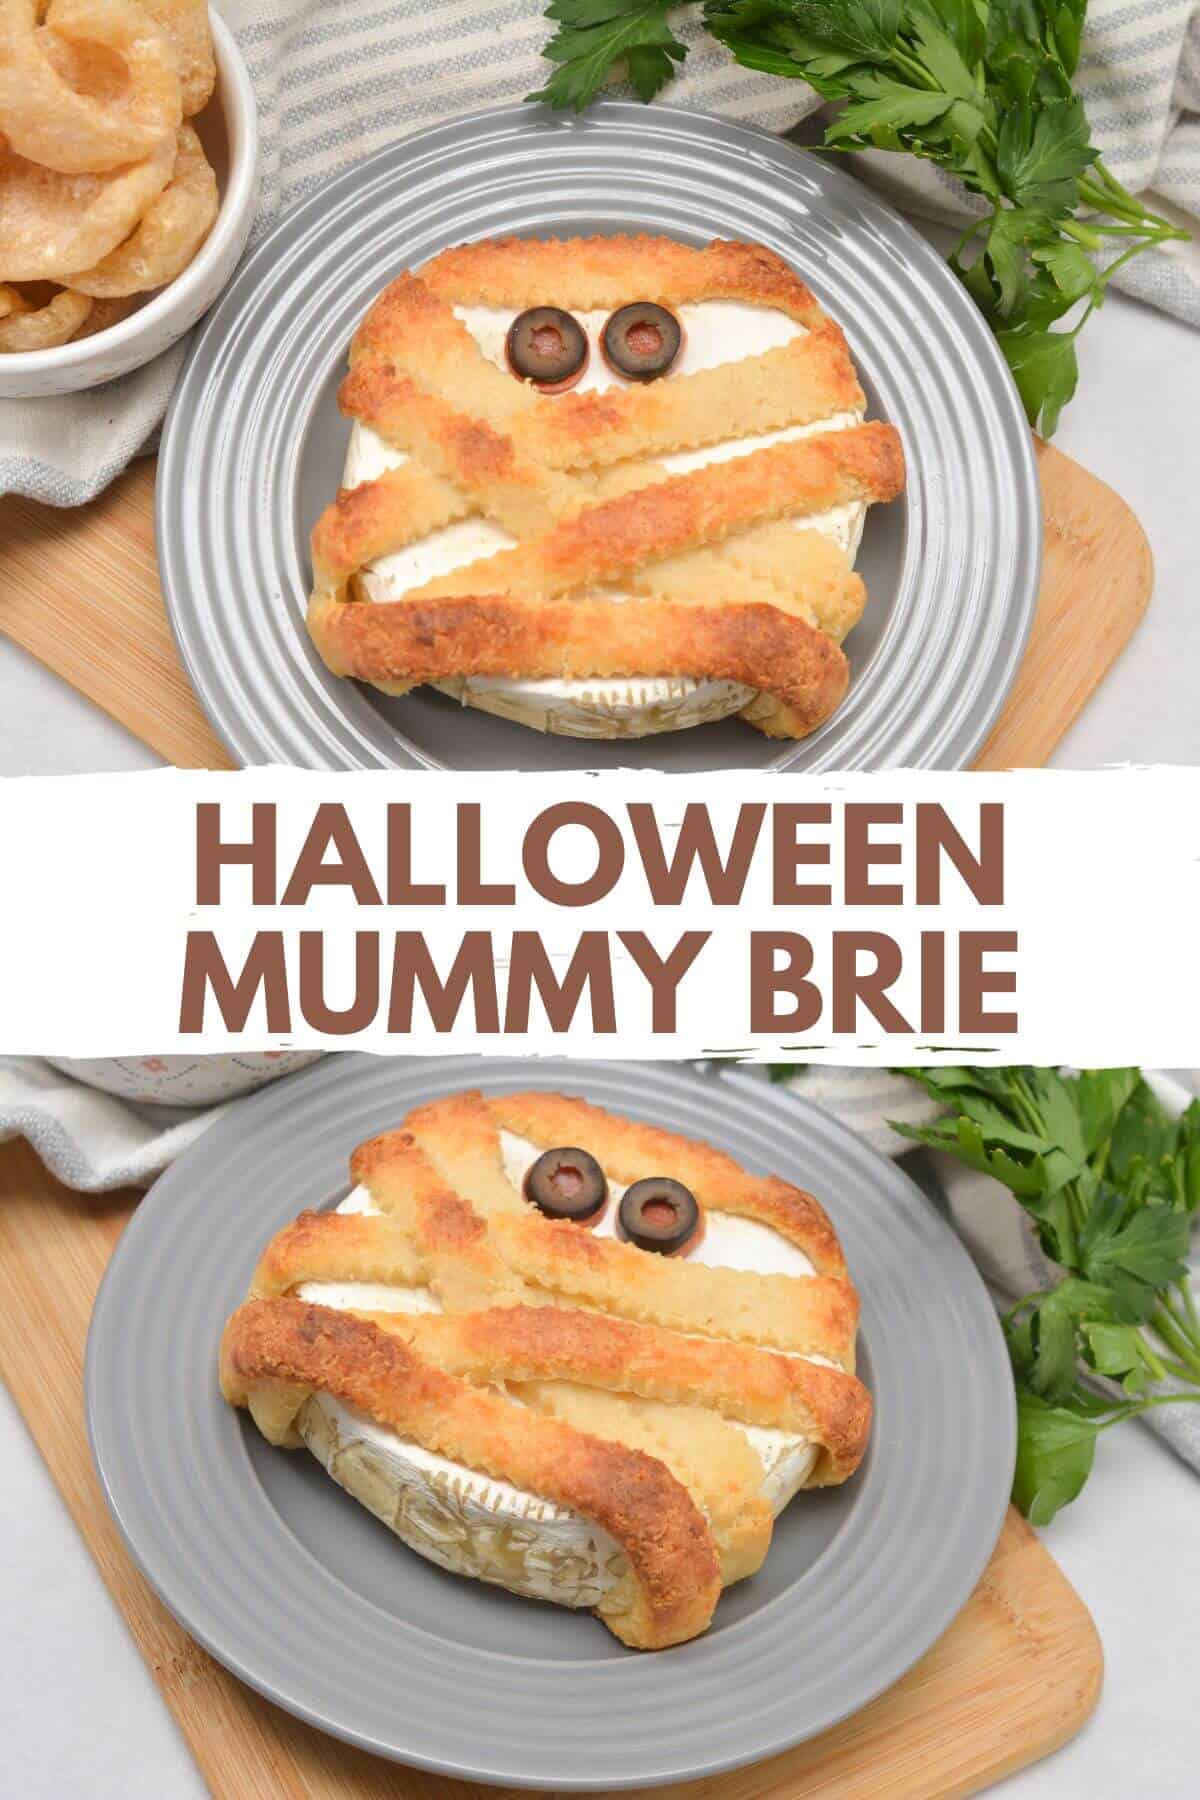 Halloween mummy brie cheese on a plate.